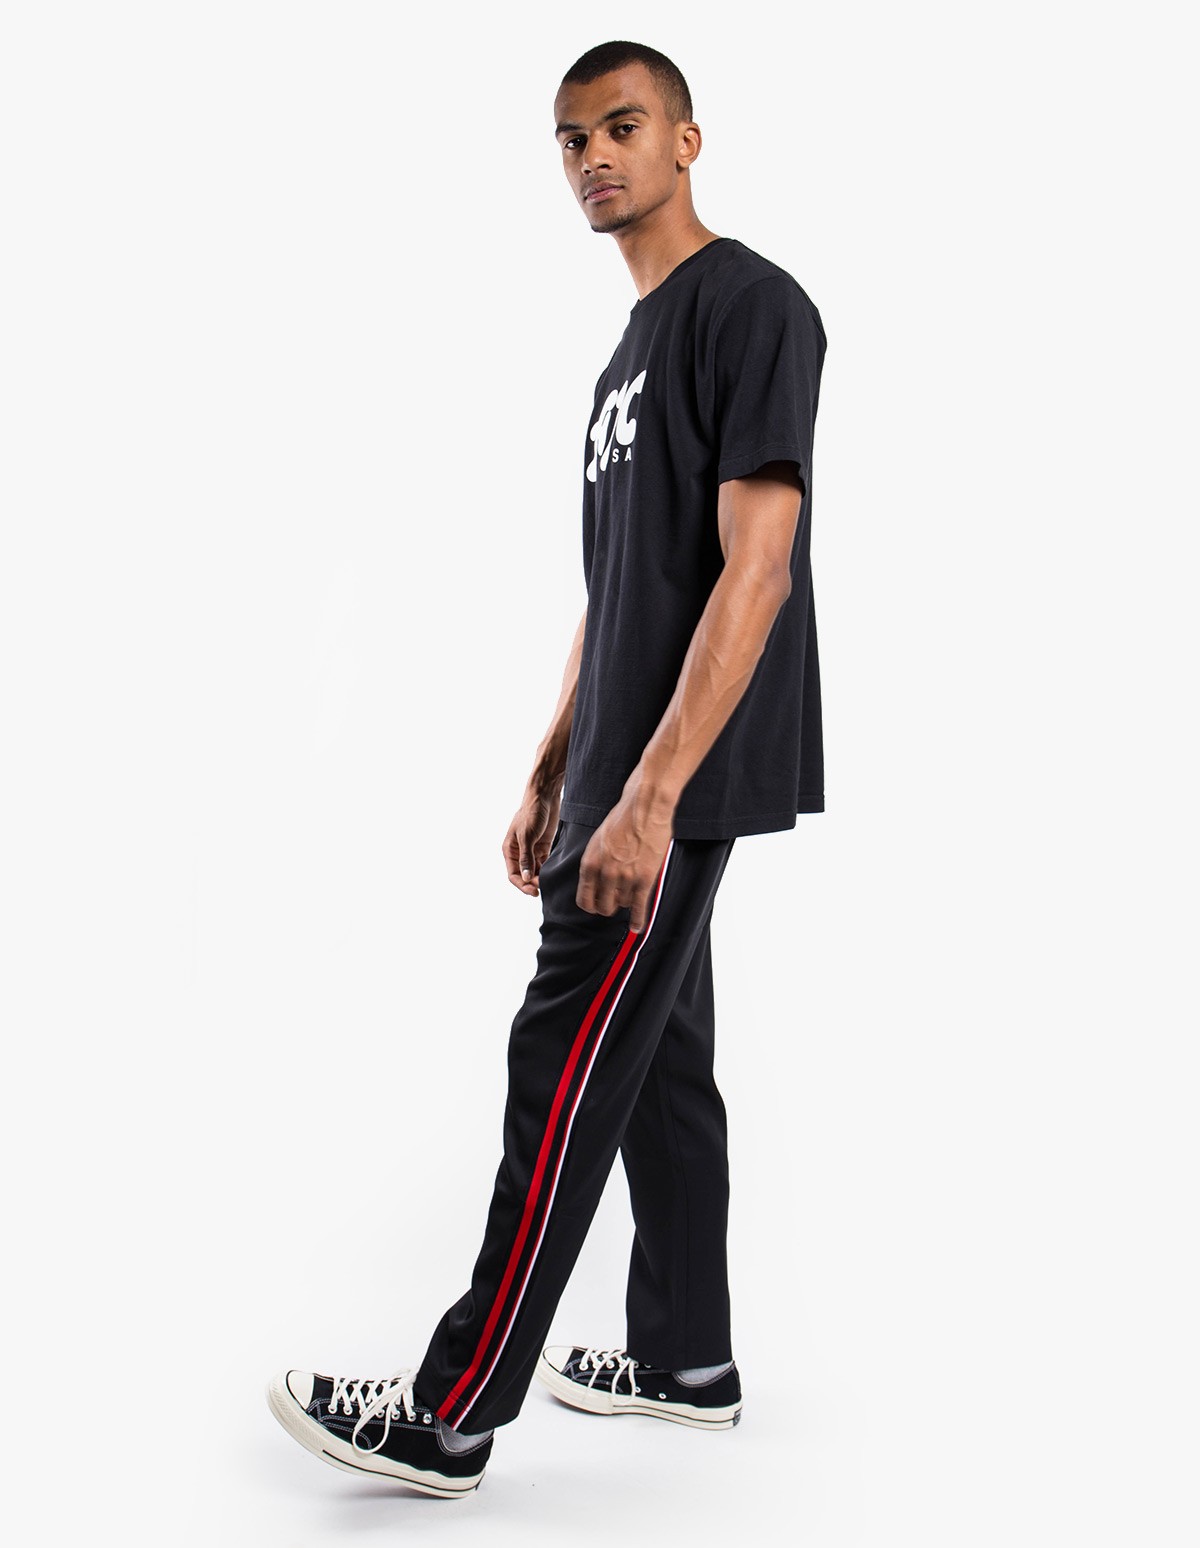 CMMN SWDN Buck Track Pants in Black / Red